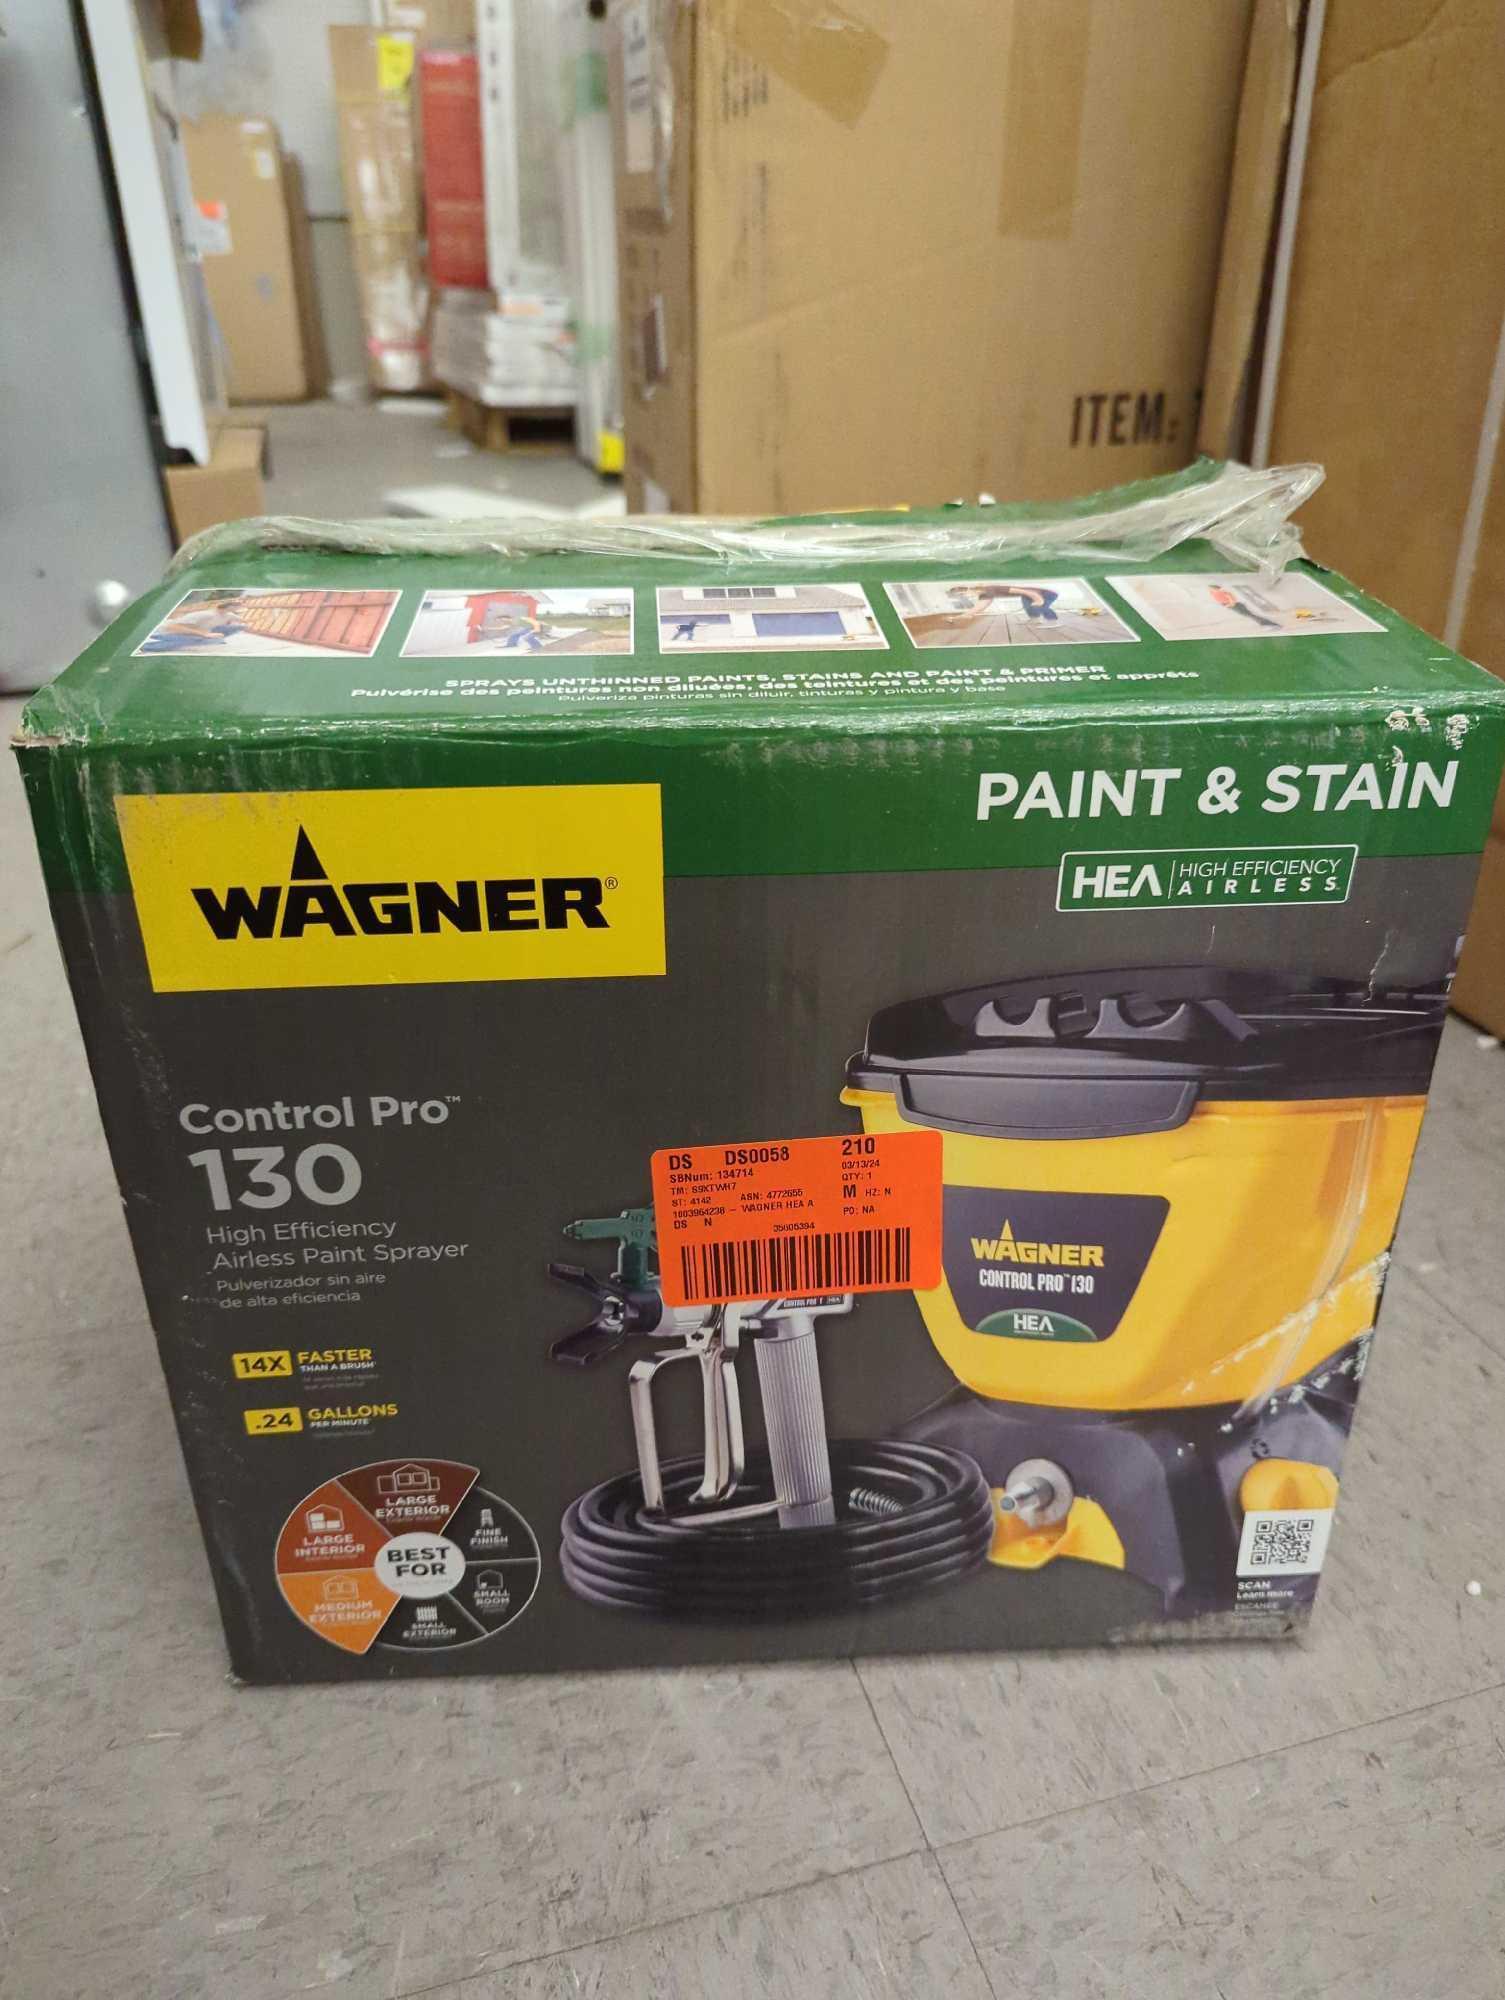 Wagner Control Pro 130 High Efficiency Airless Power Tank Paint and Stain Sprayer, MSRP 229.00, UNIT